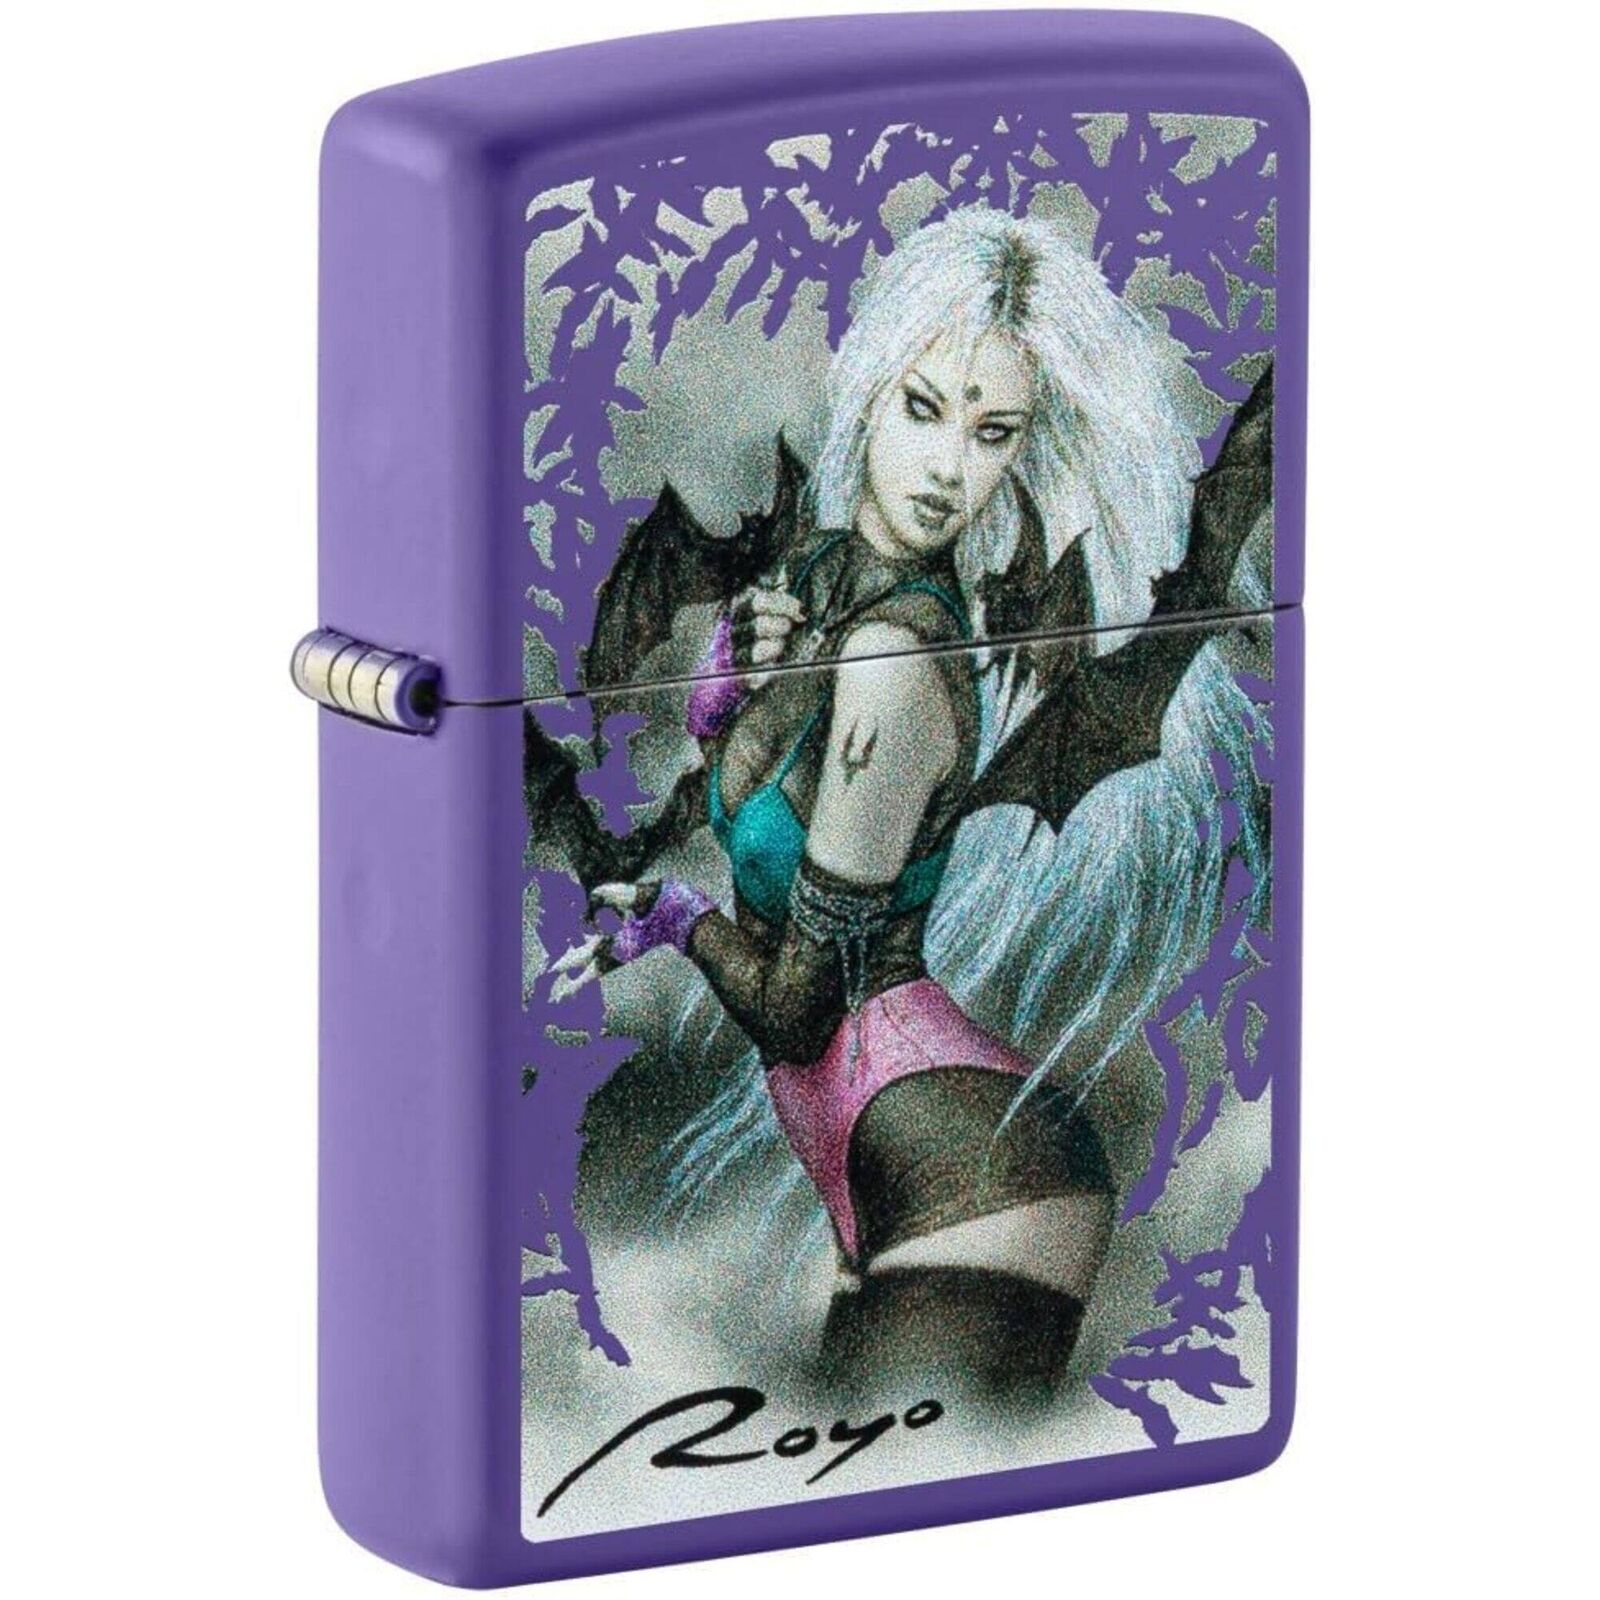 Zippo Lighter Mythical Luis Royo Metal Construction Refillable Windproof 48963